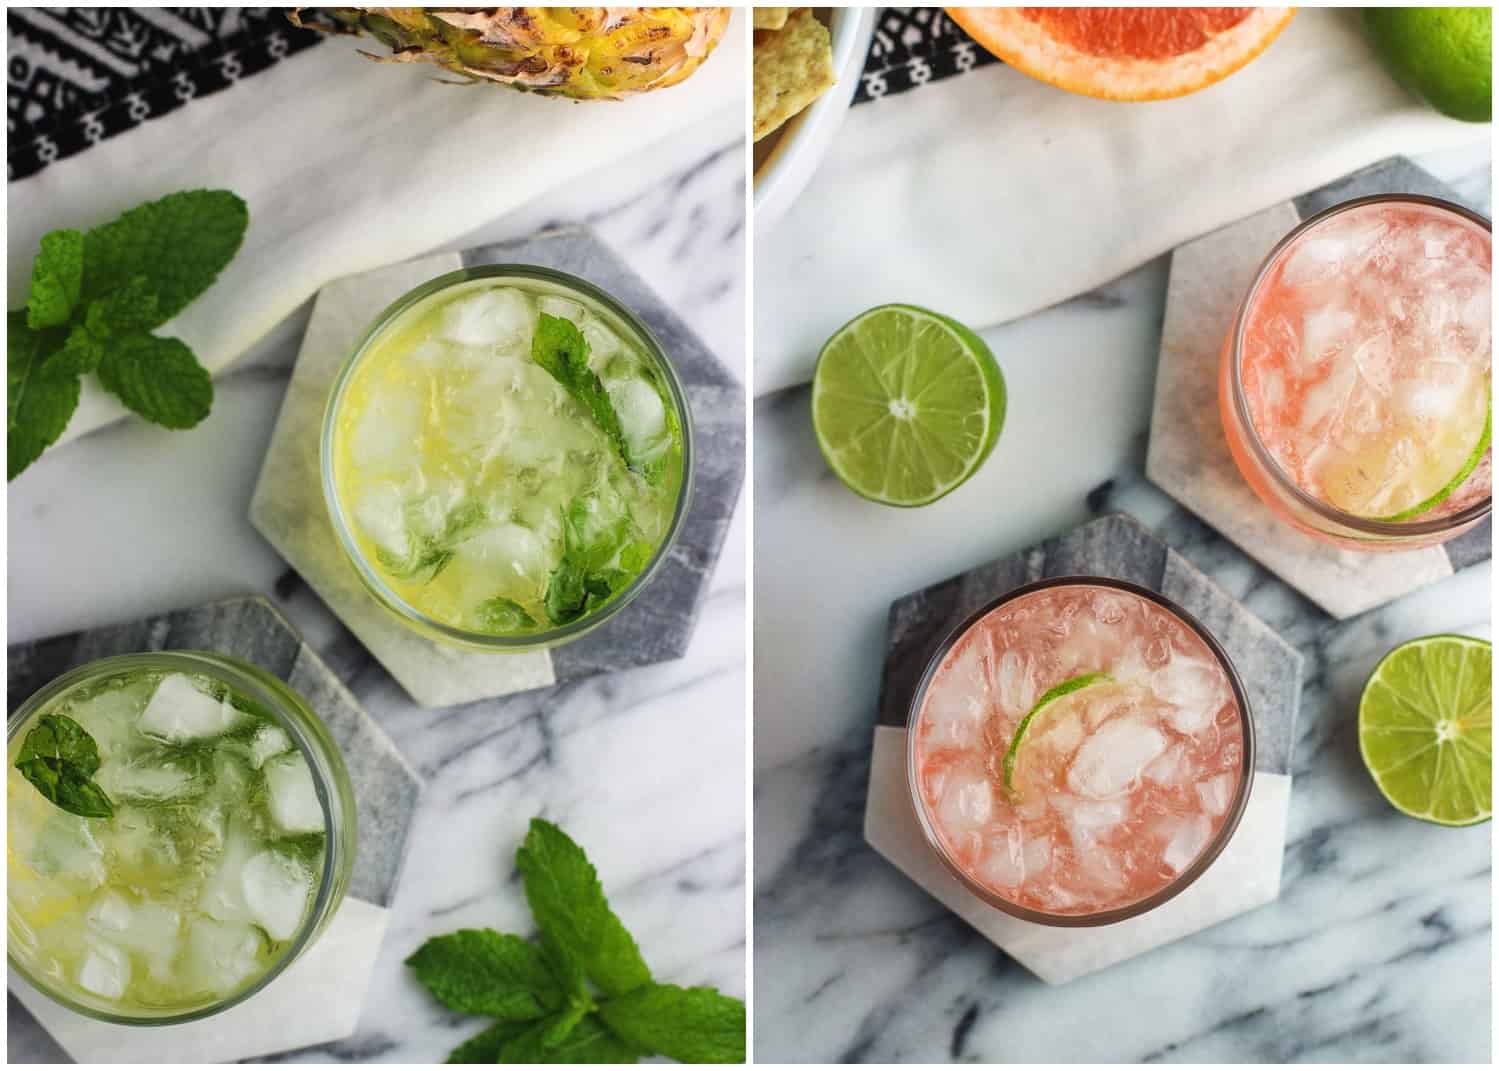 Pineapple mint vodka sodas on coasters (left) and grapefruit lime (right).